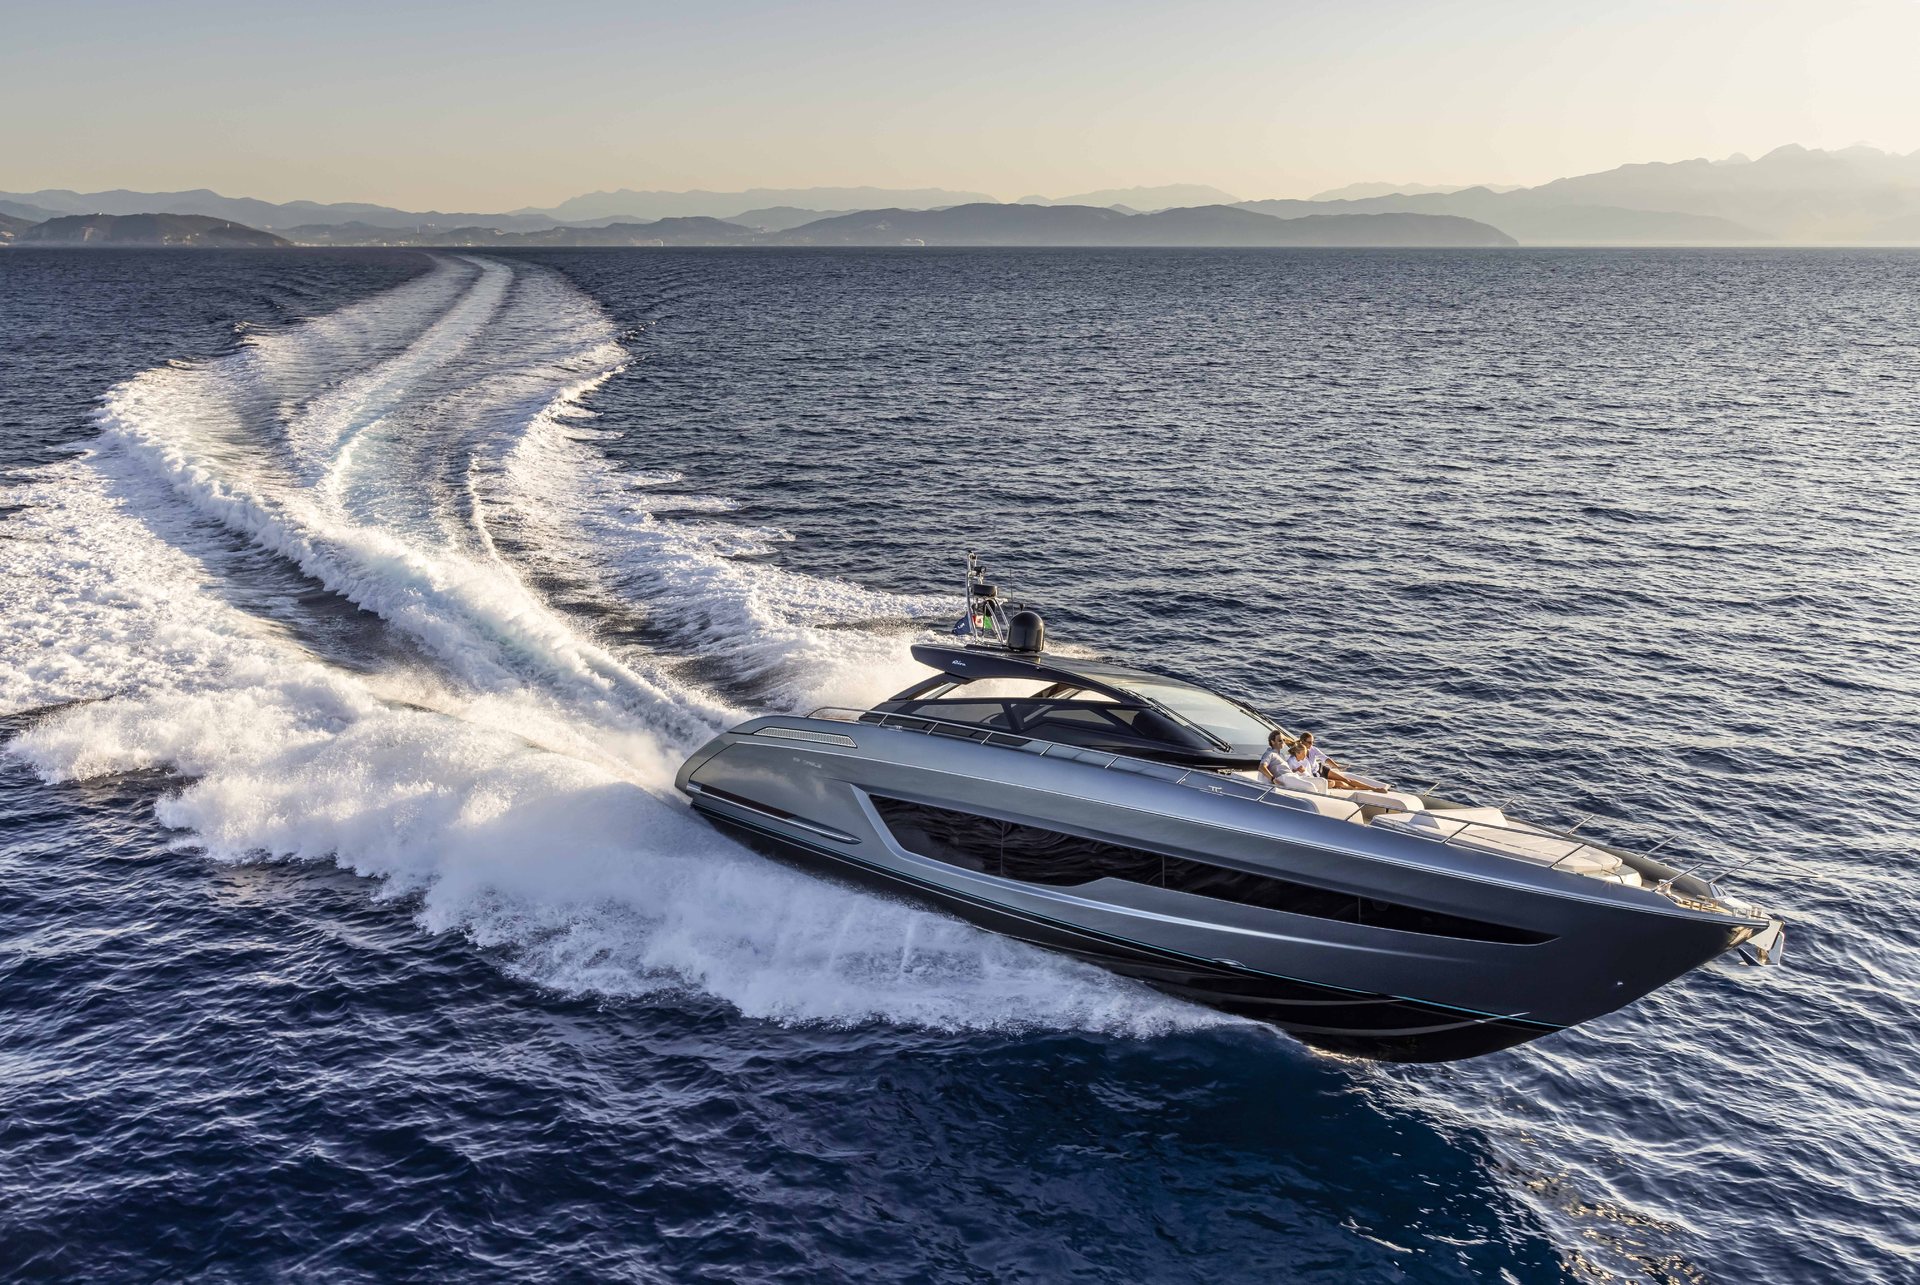 360 VR Virtual Tours of the Riva 68 Diable